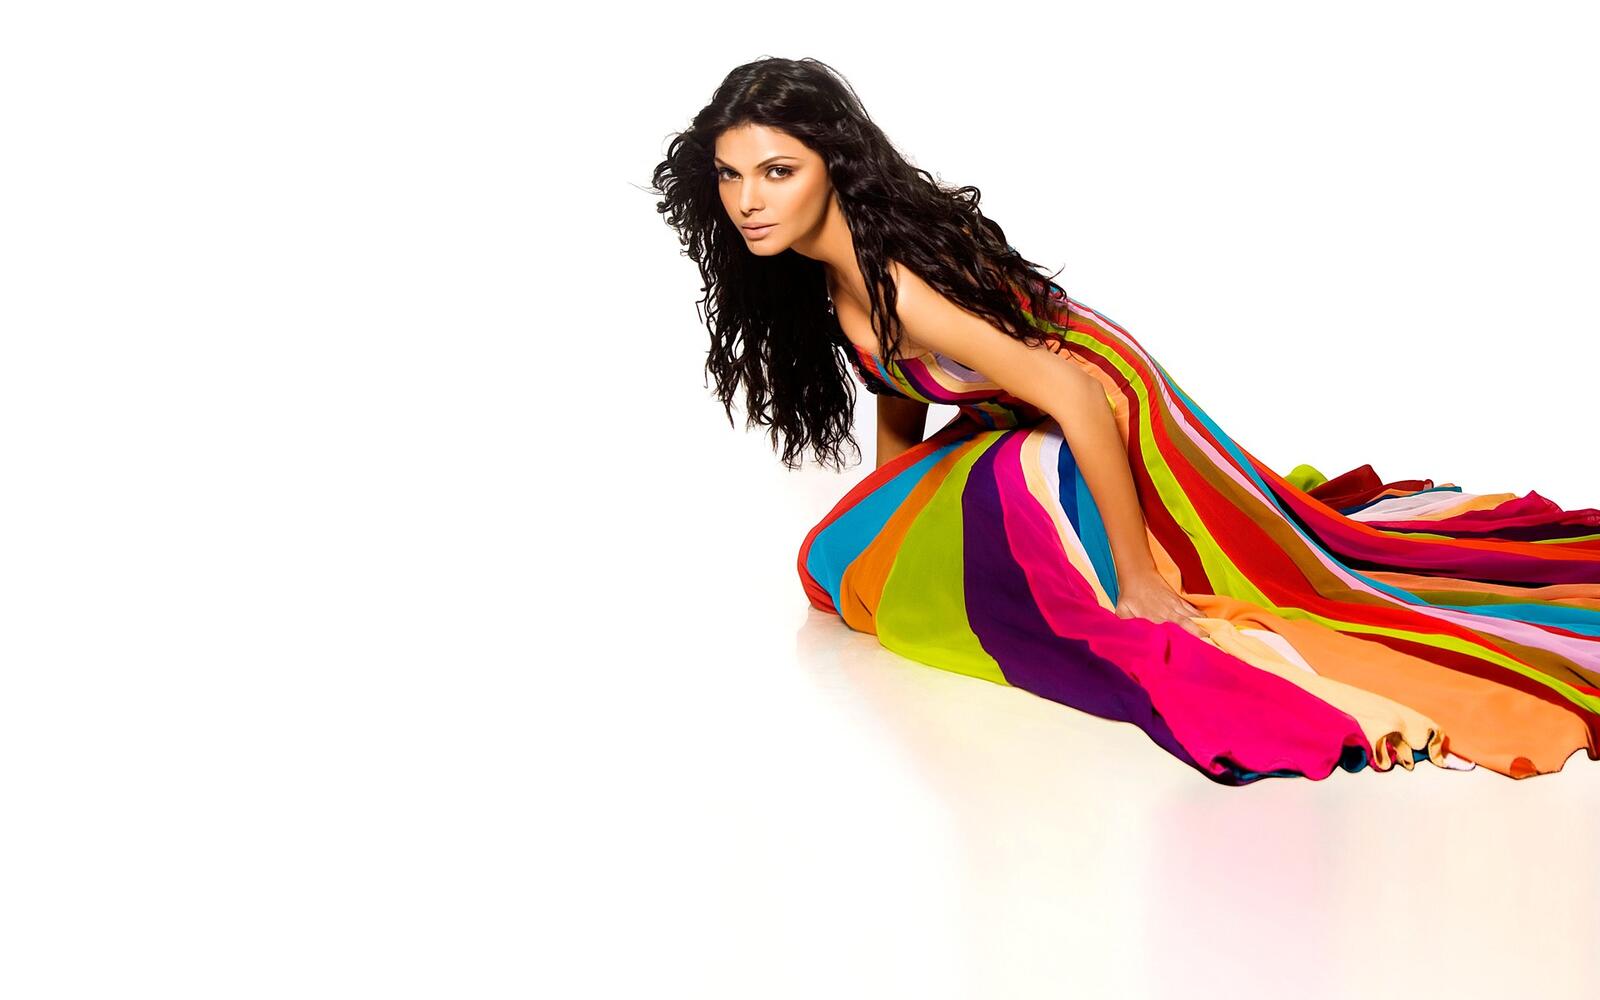 Free photo Indian celebrity Sherlyn Chopra in a colored dress on a white background